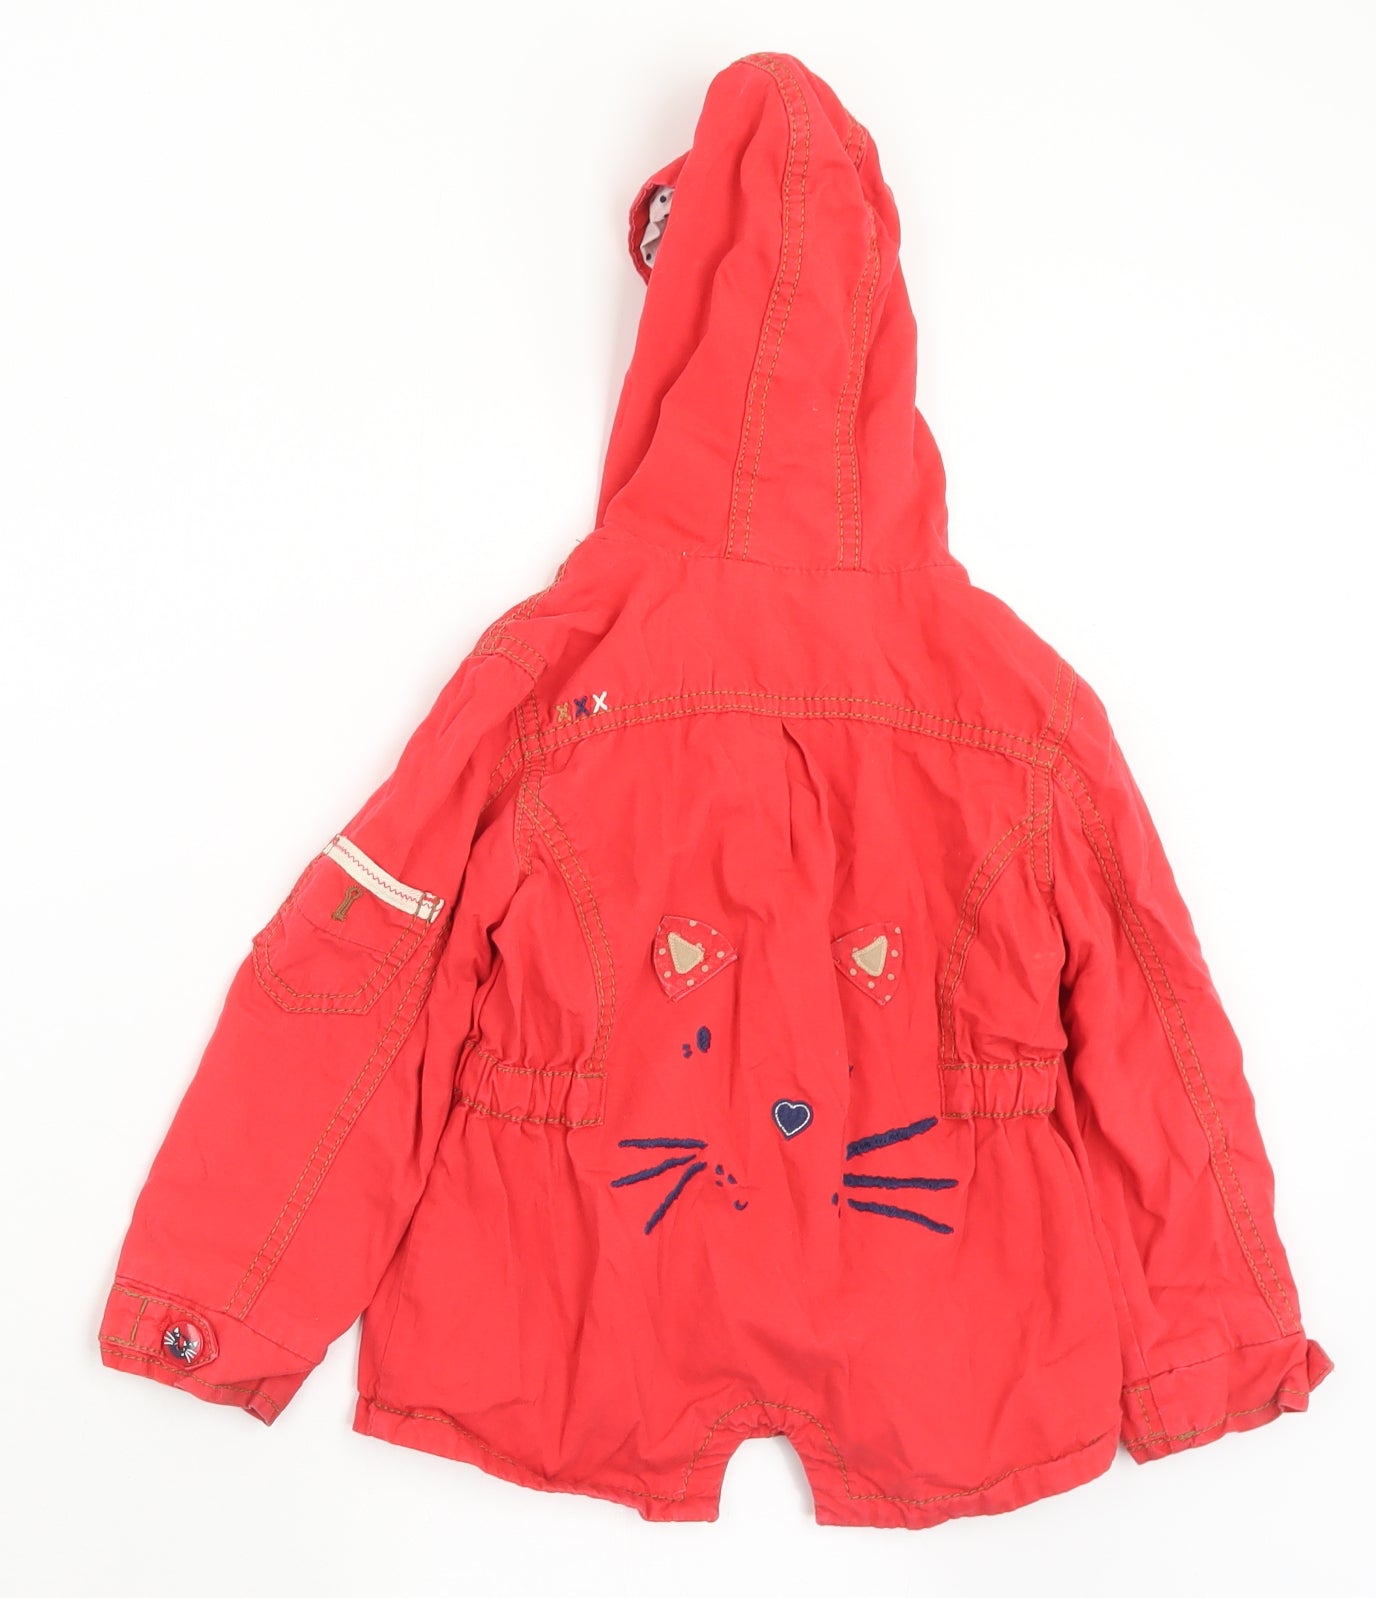 NEXT Girls Red Polka Dot  Parka Coat Size 2-3 Years  Button